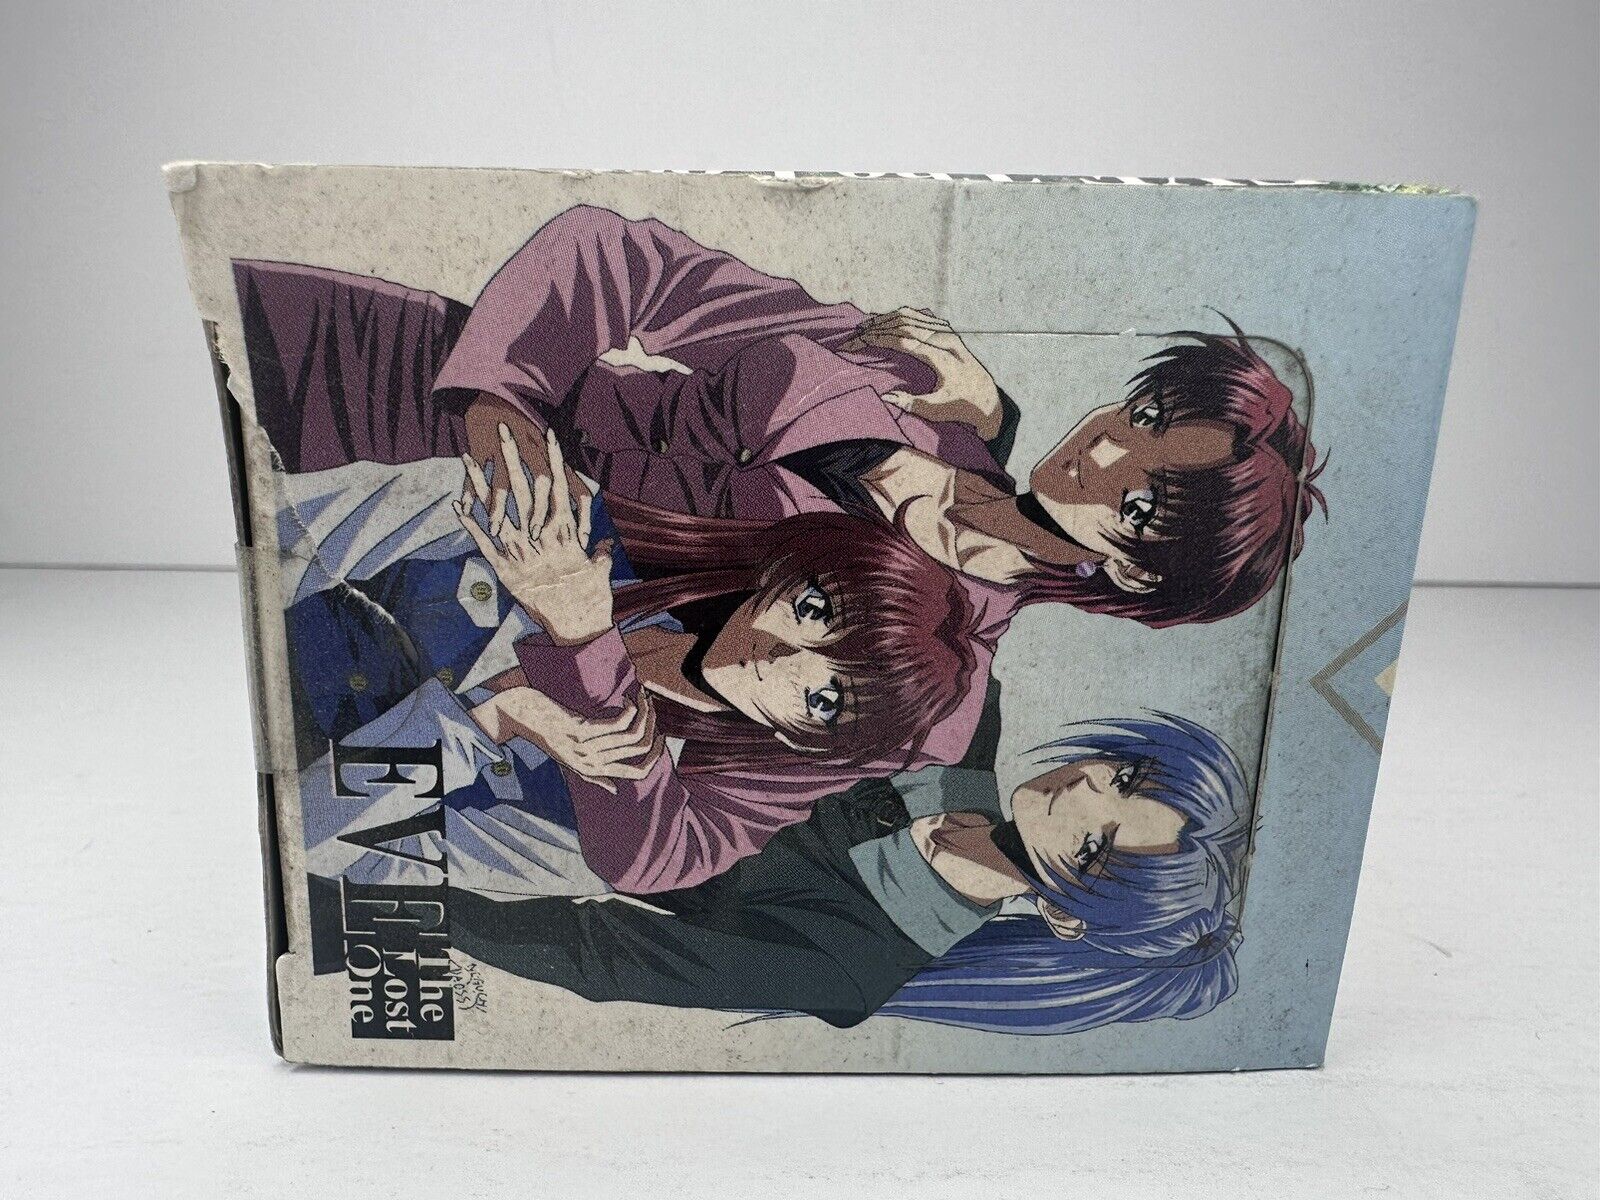 Rare Sealed 1998 EVE The Last One Vol 2 Anime Trading Cards - Vintage Japanese Collectible - TreasuTiques